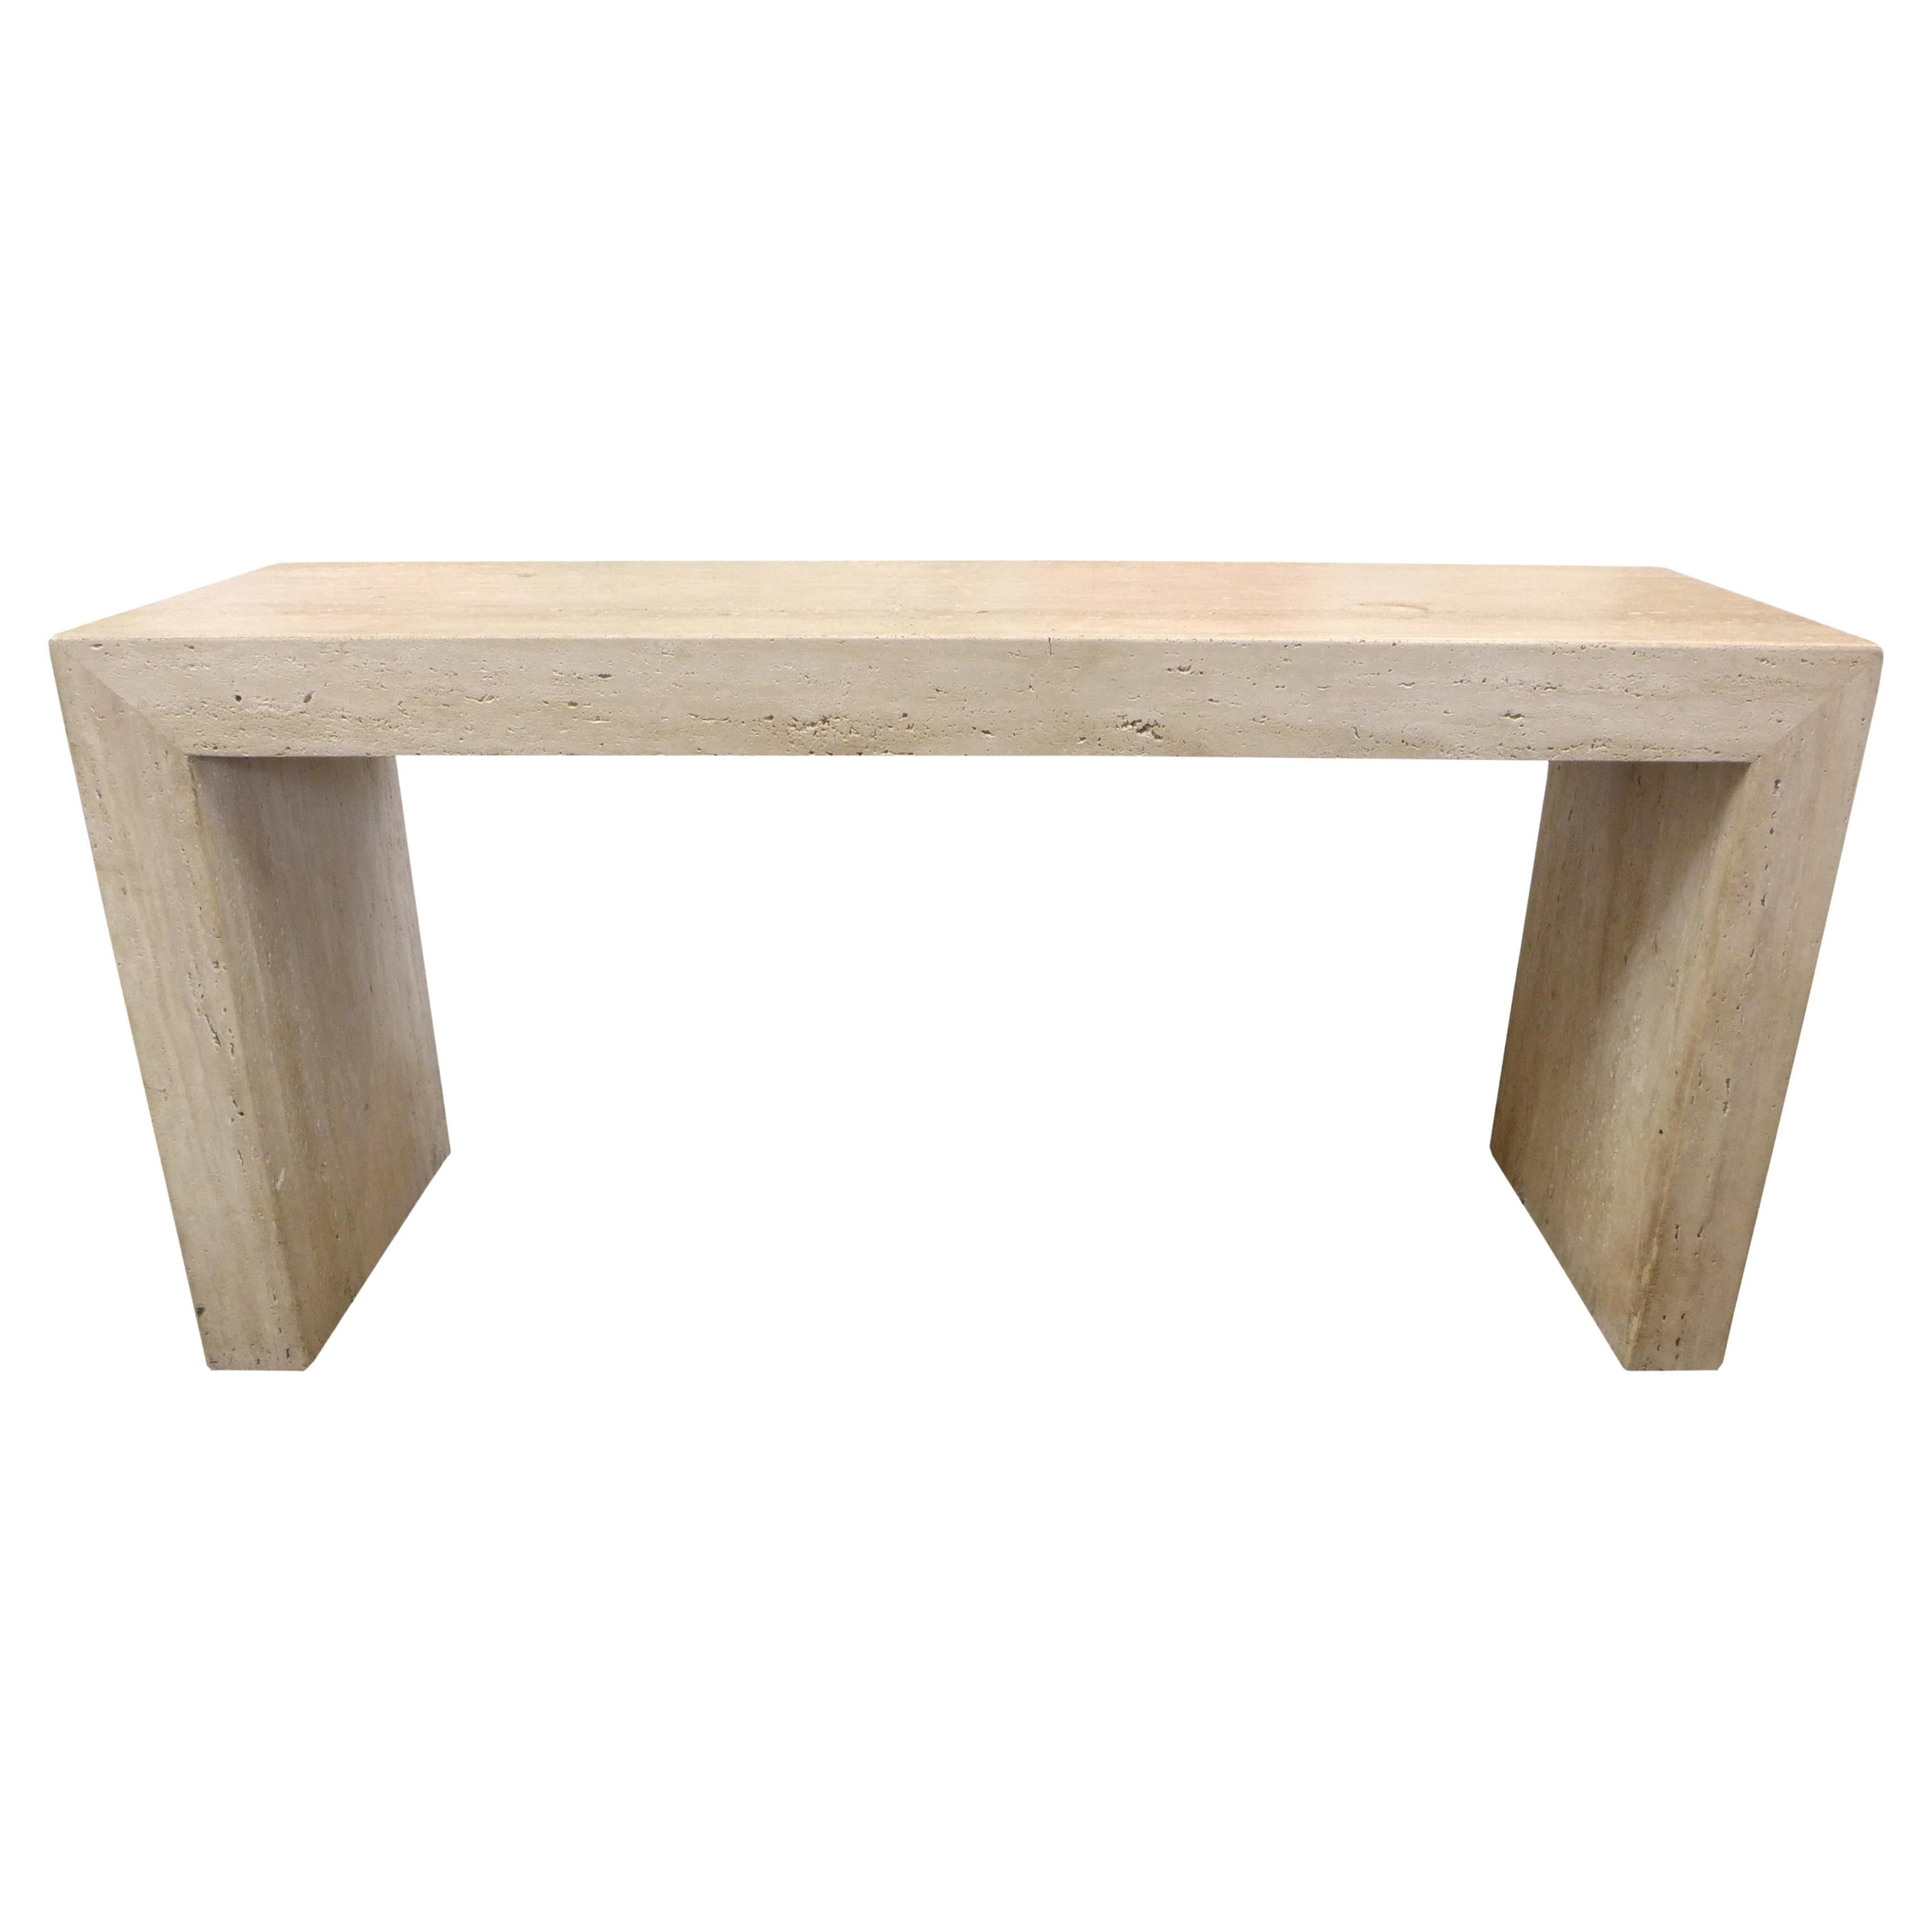 Rectilinear Modernist Travertine Console Table